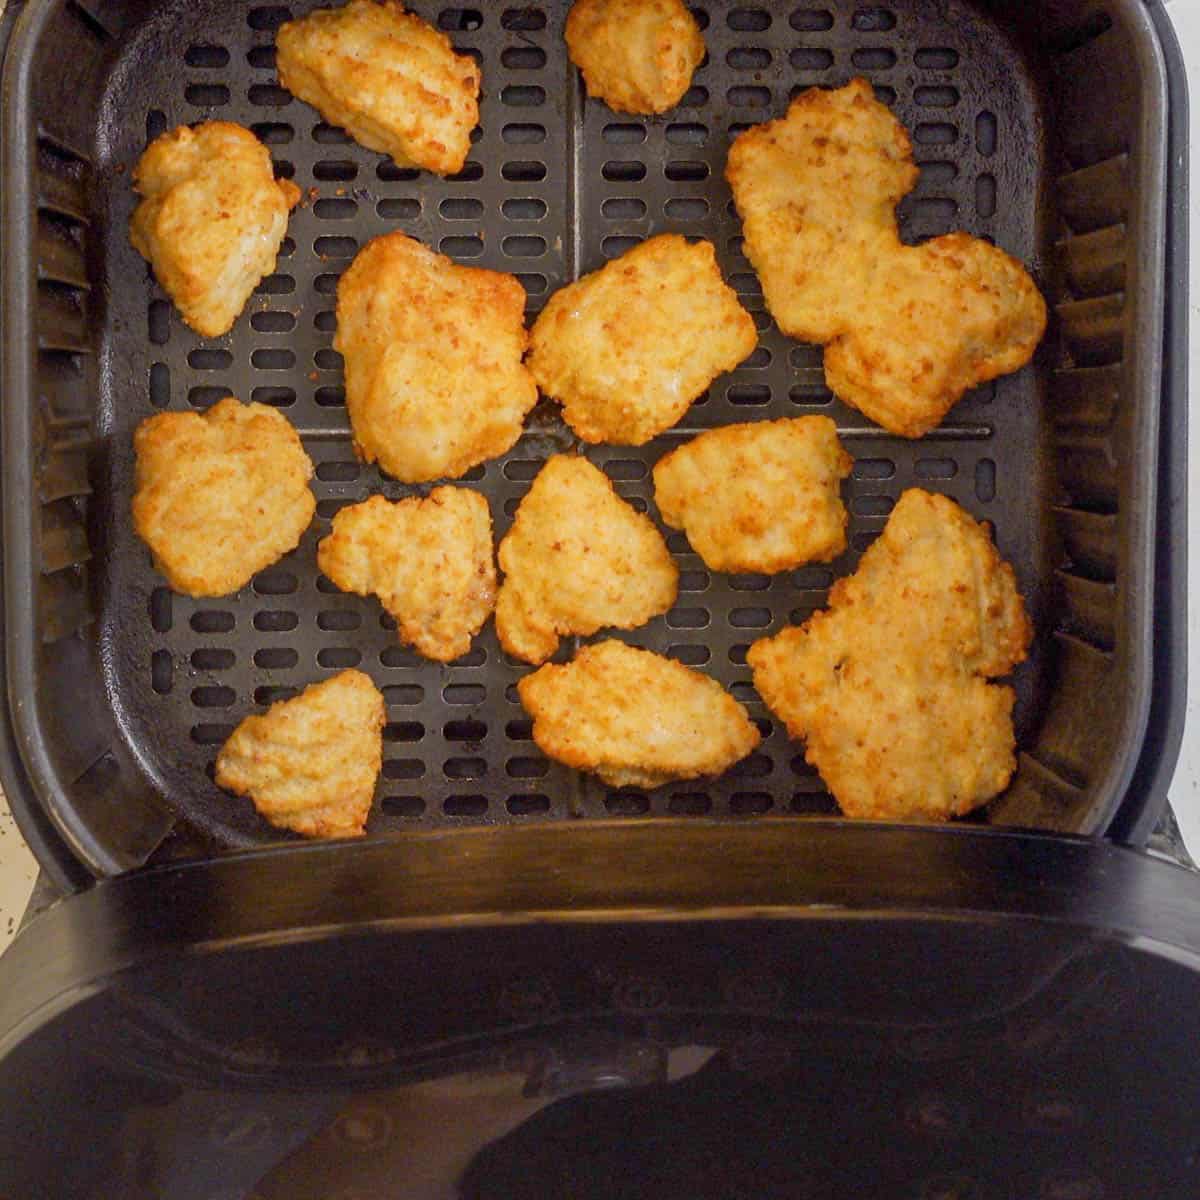 Flipped chicken nugget in the air fryer basket ready to eat